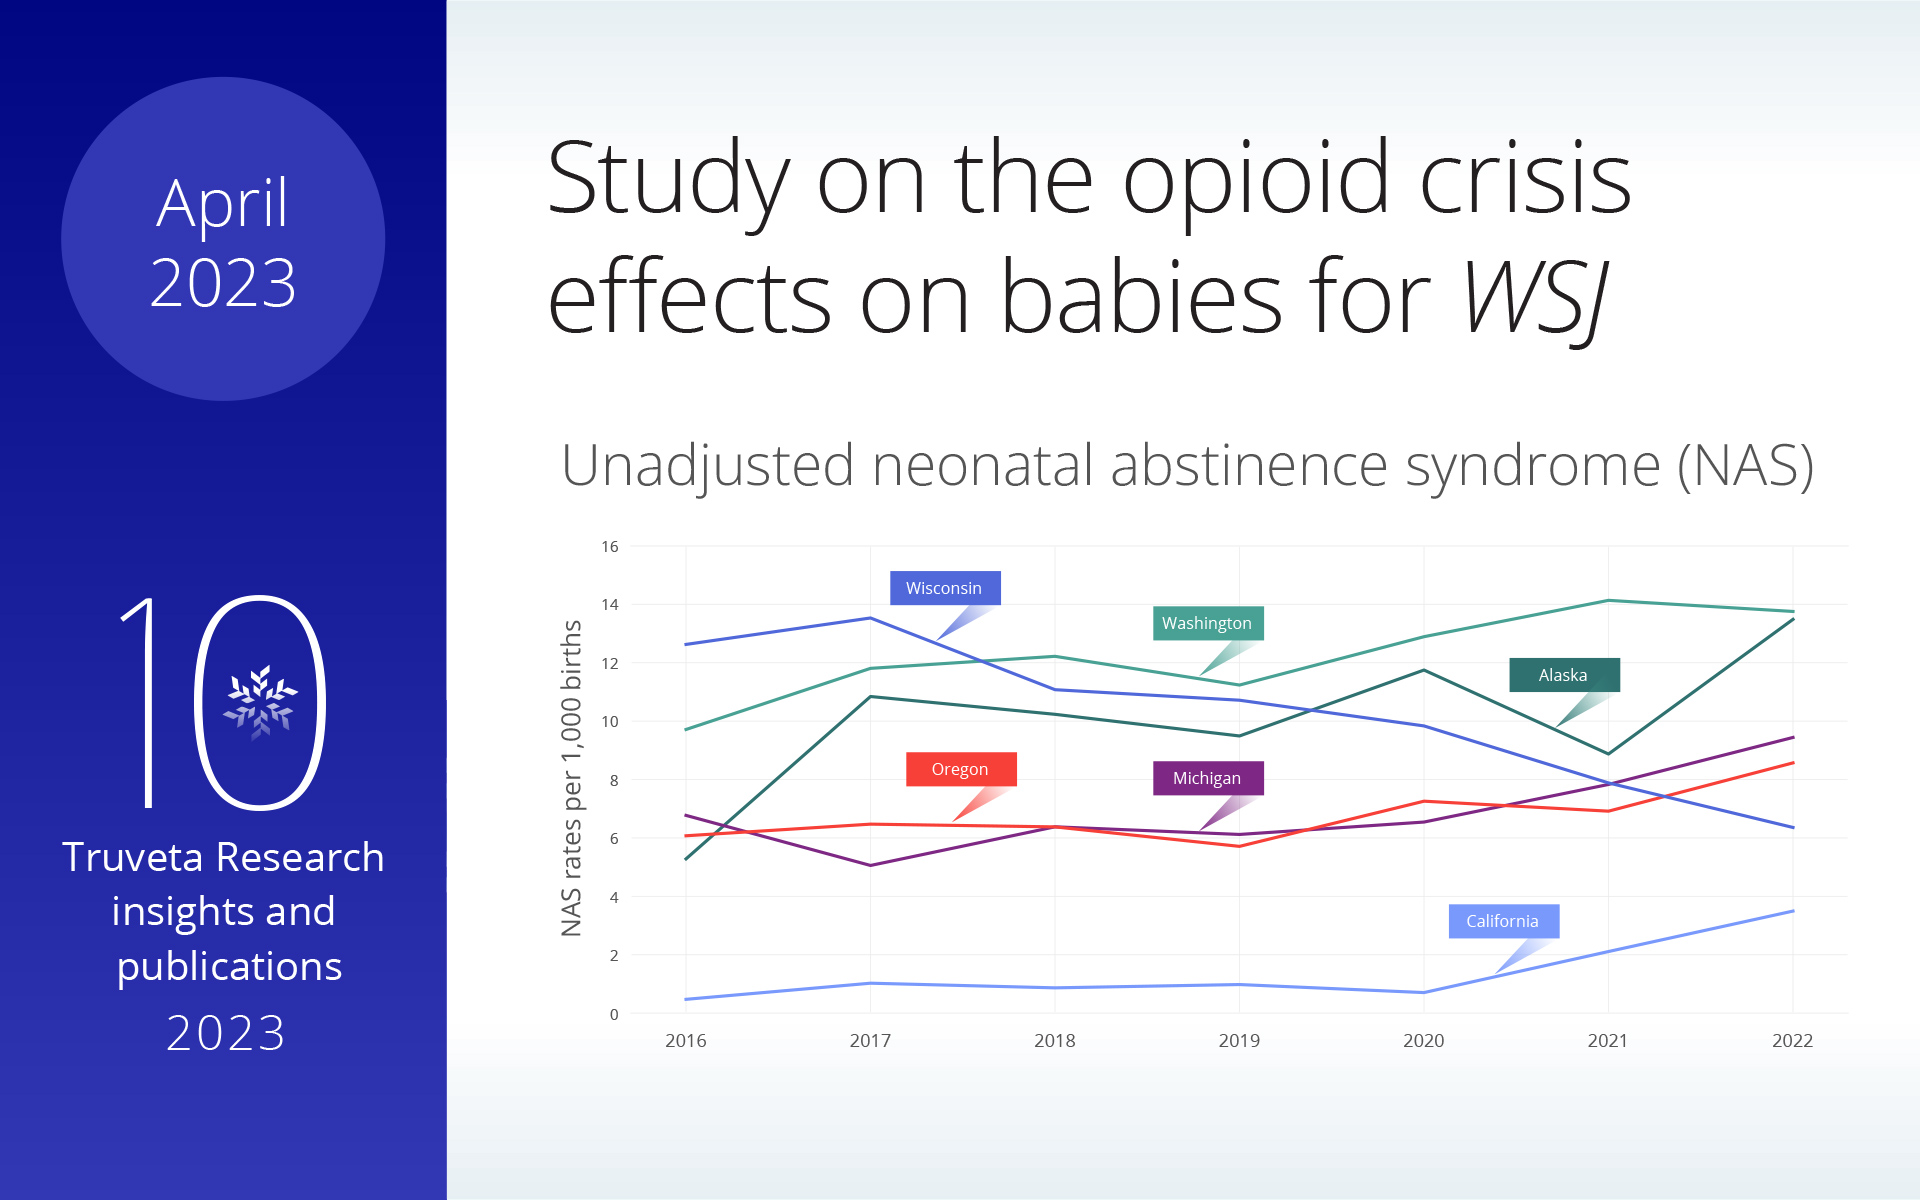 impact of opioid crisis on babies in the US